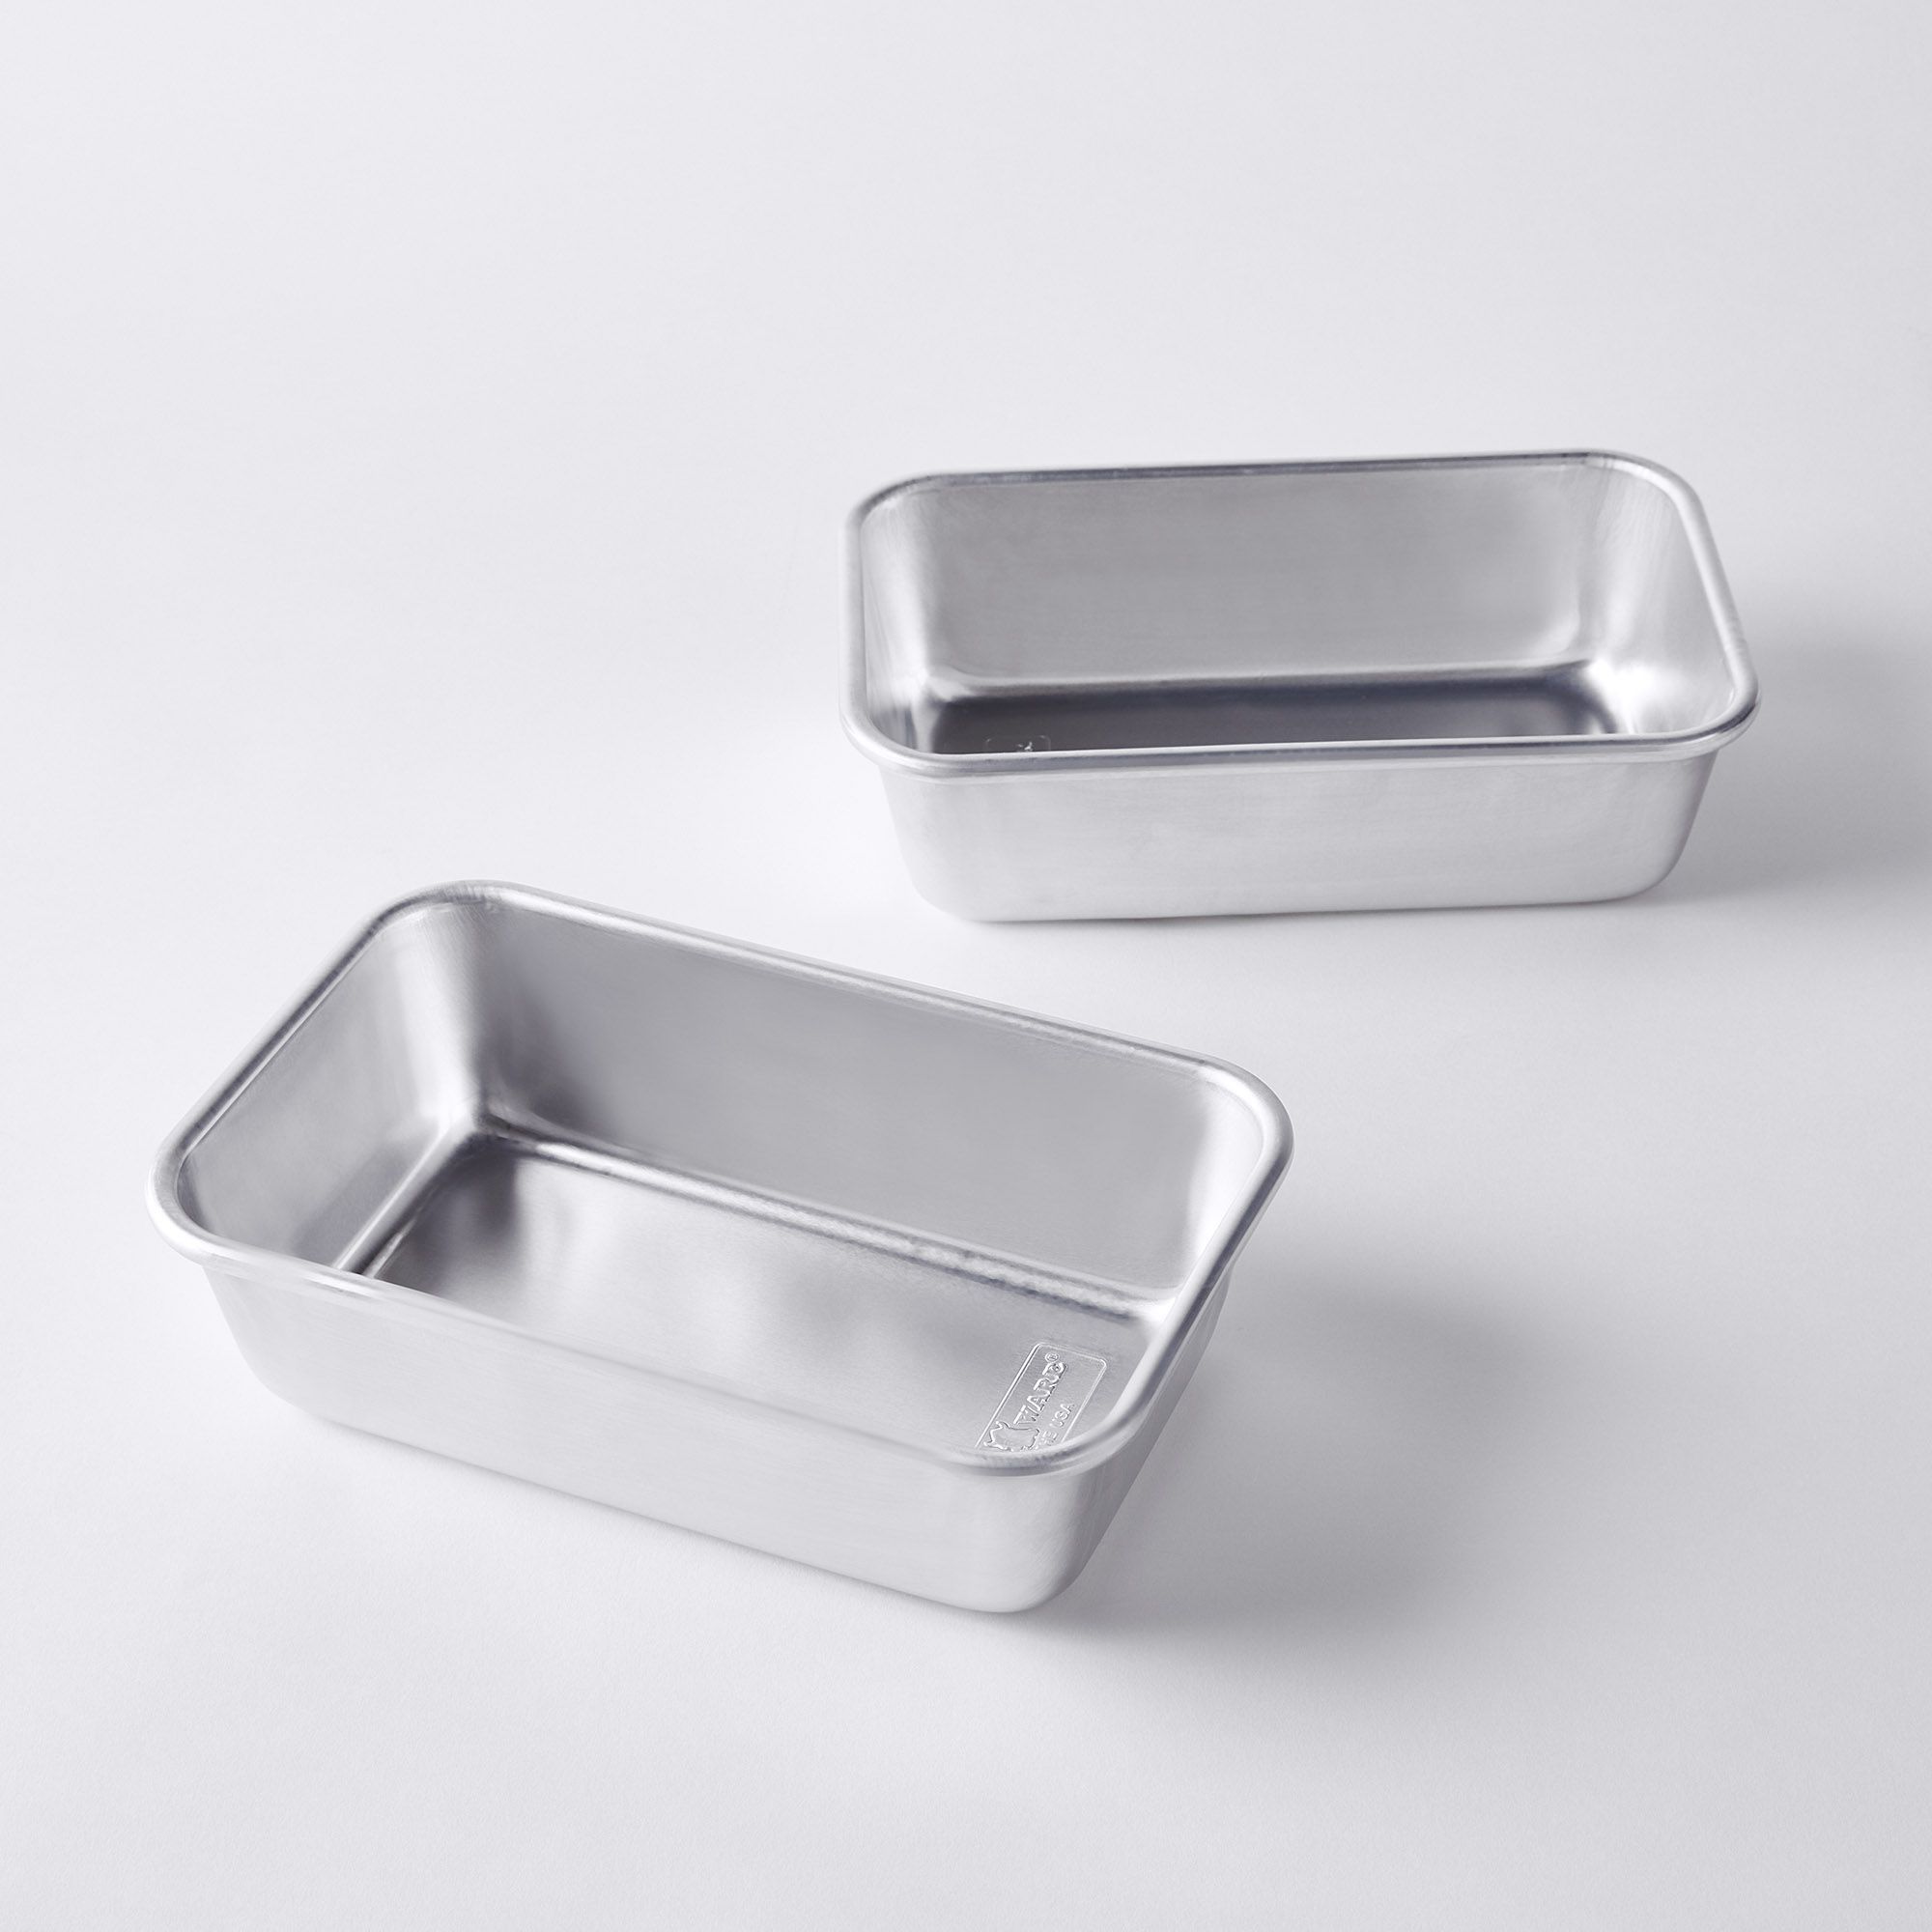 Details about   NORDIC WARE Christmas Mini Bread Cast Aluminum Baking Pan Preowned F 